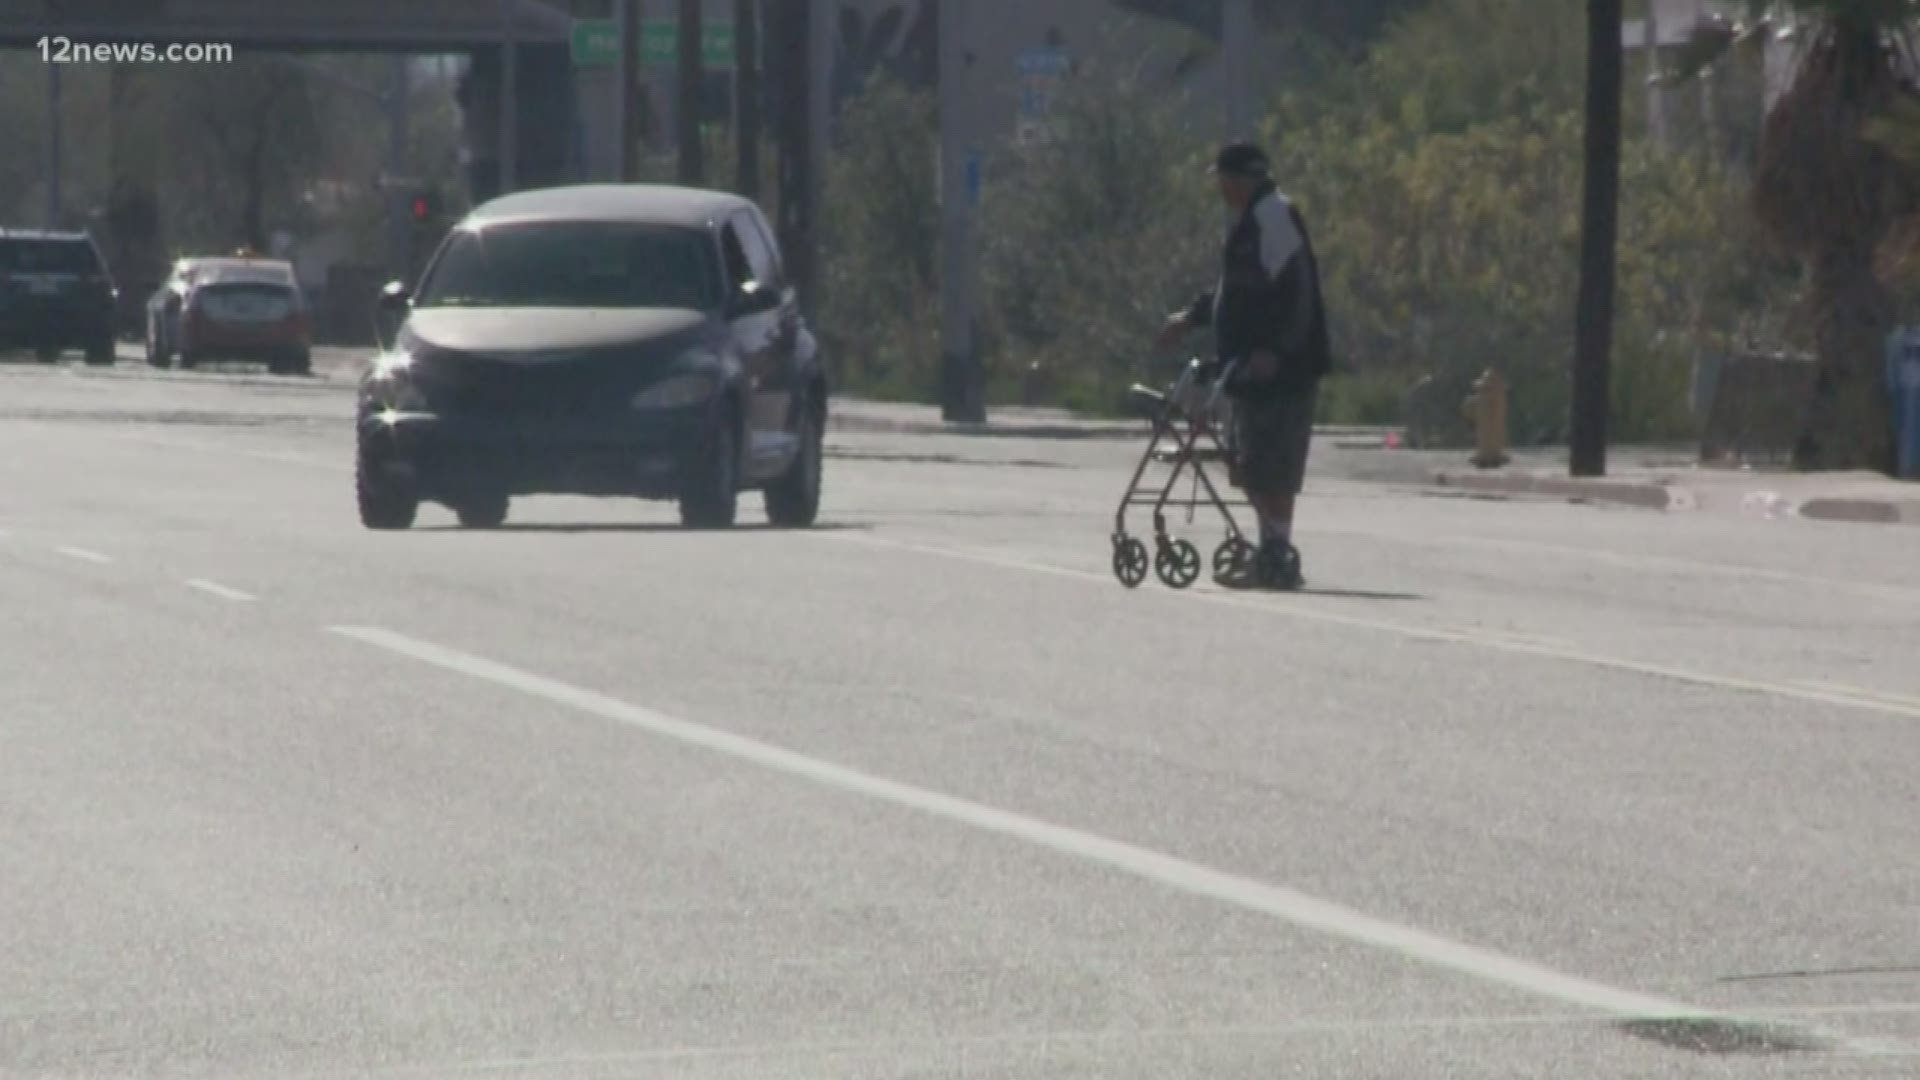 It's the city's latest move in the fight against pedestrian-related deaths. Team 12's Jen Wahl has the latest.